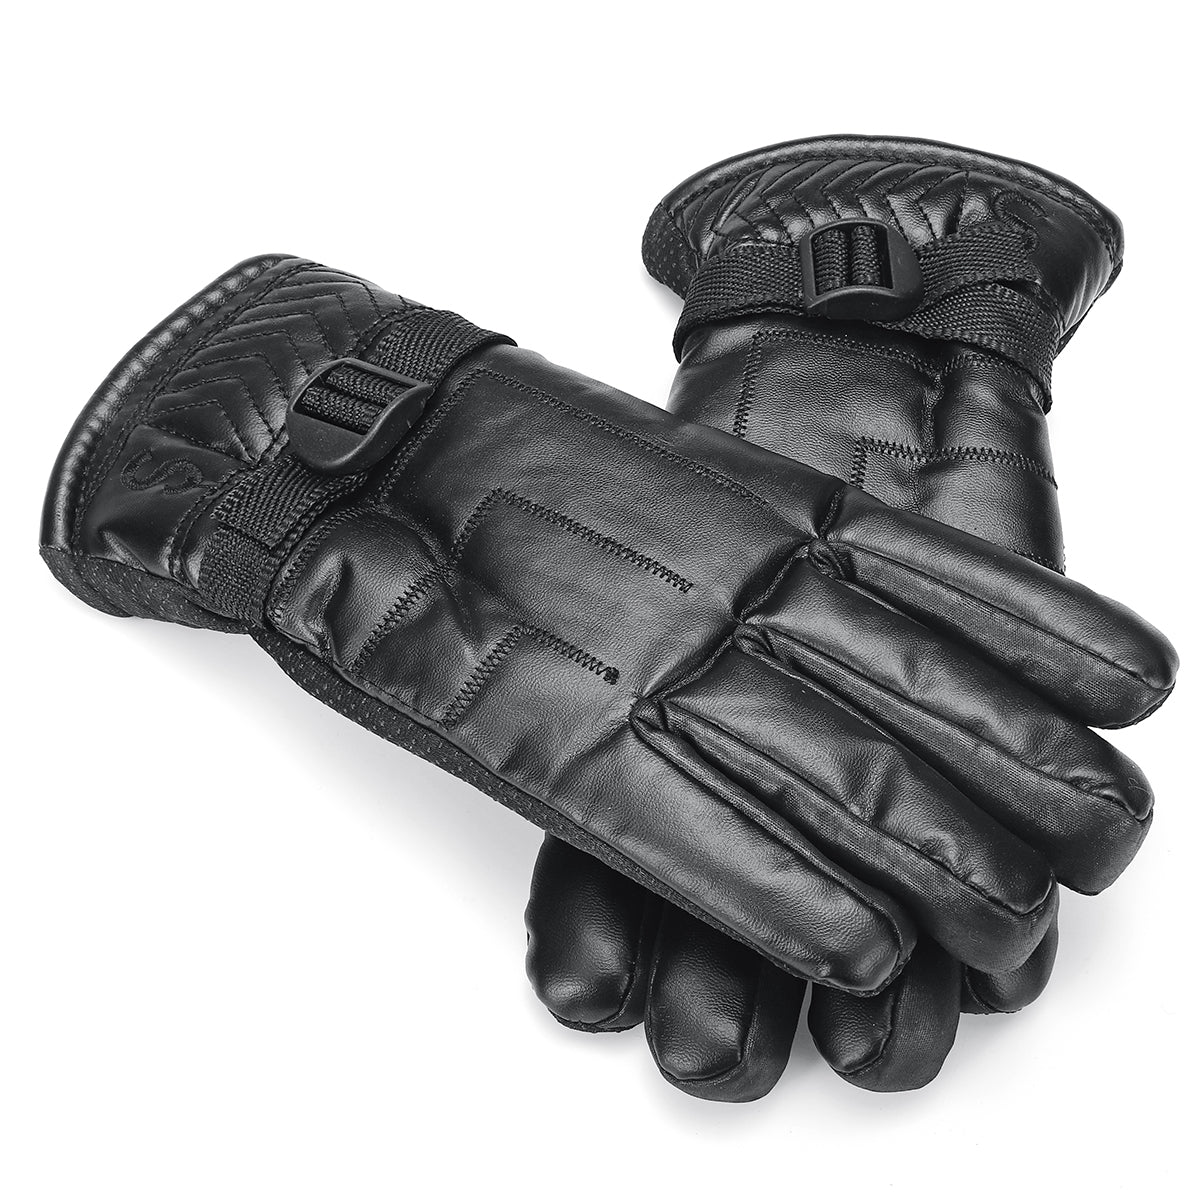 Dim Gray Warm Gloves Mittens Simulation Leather Full Fluff Windproof Motorcycle Cold Protection